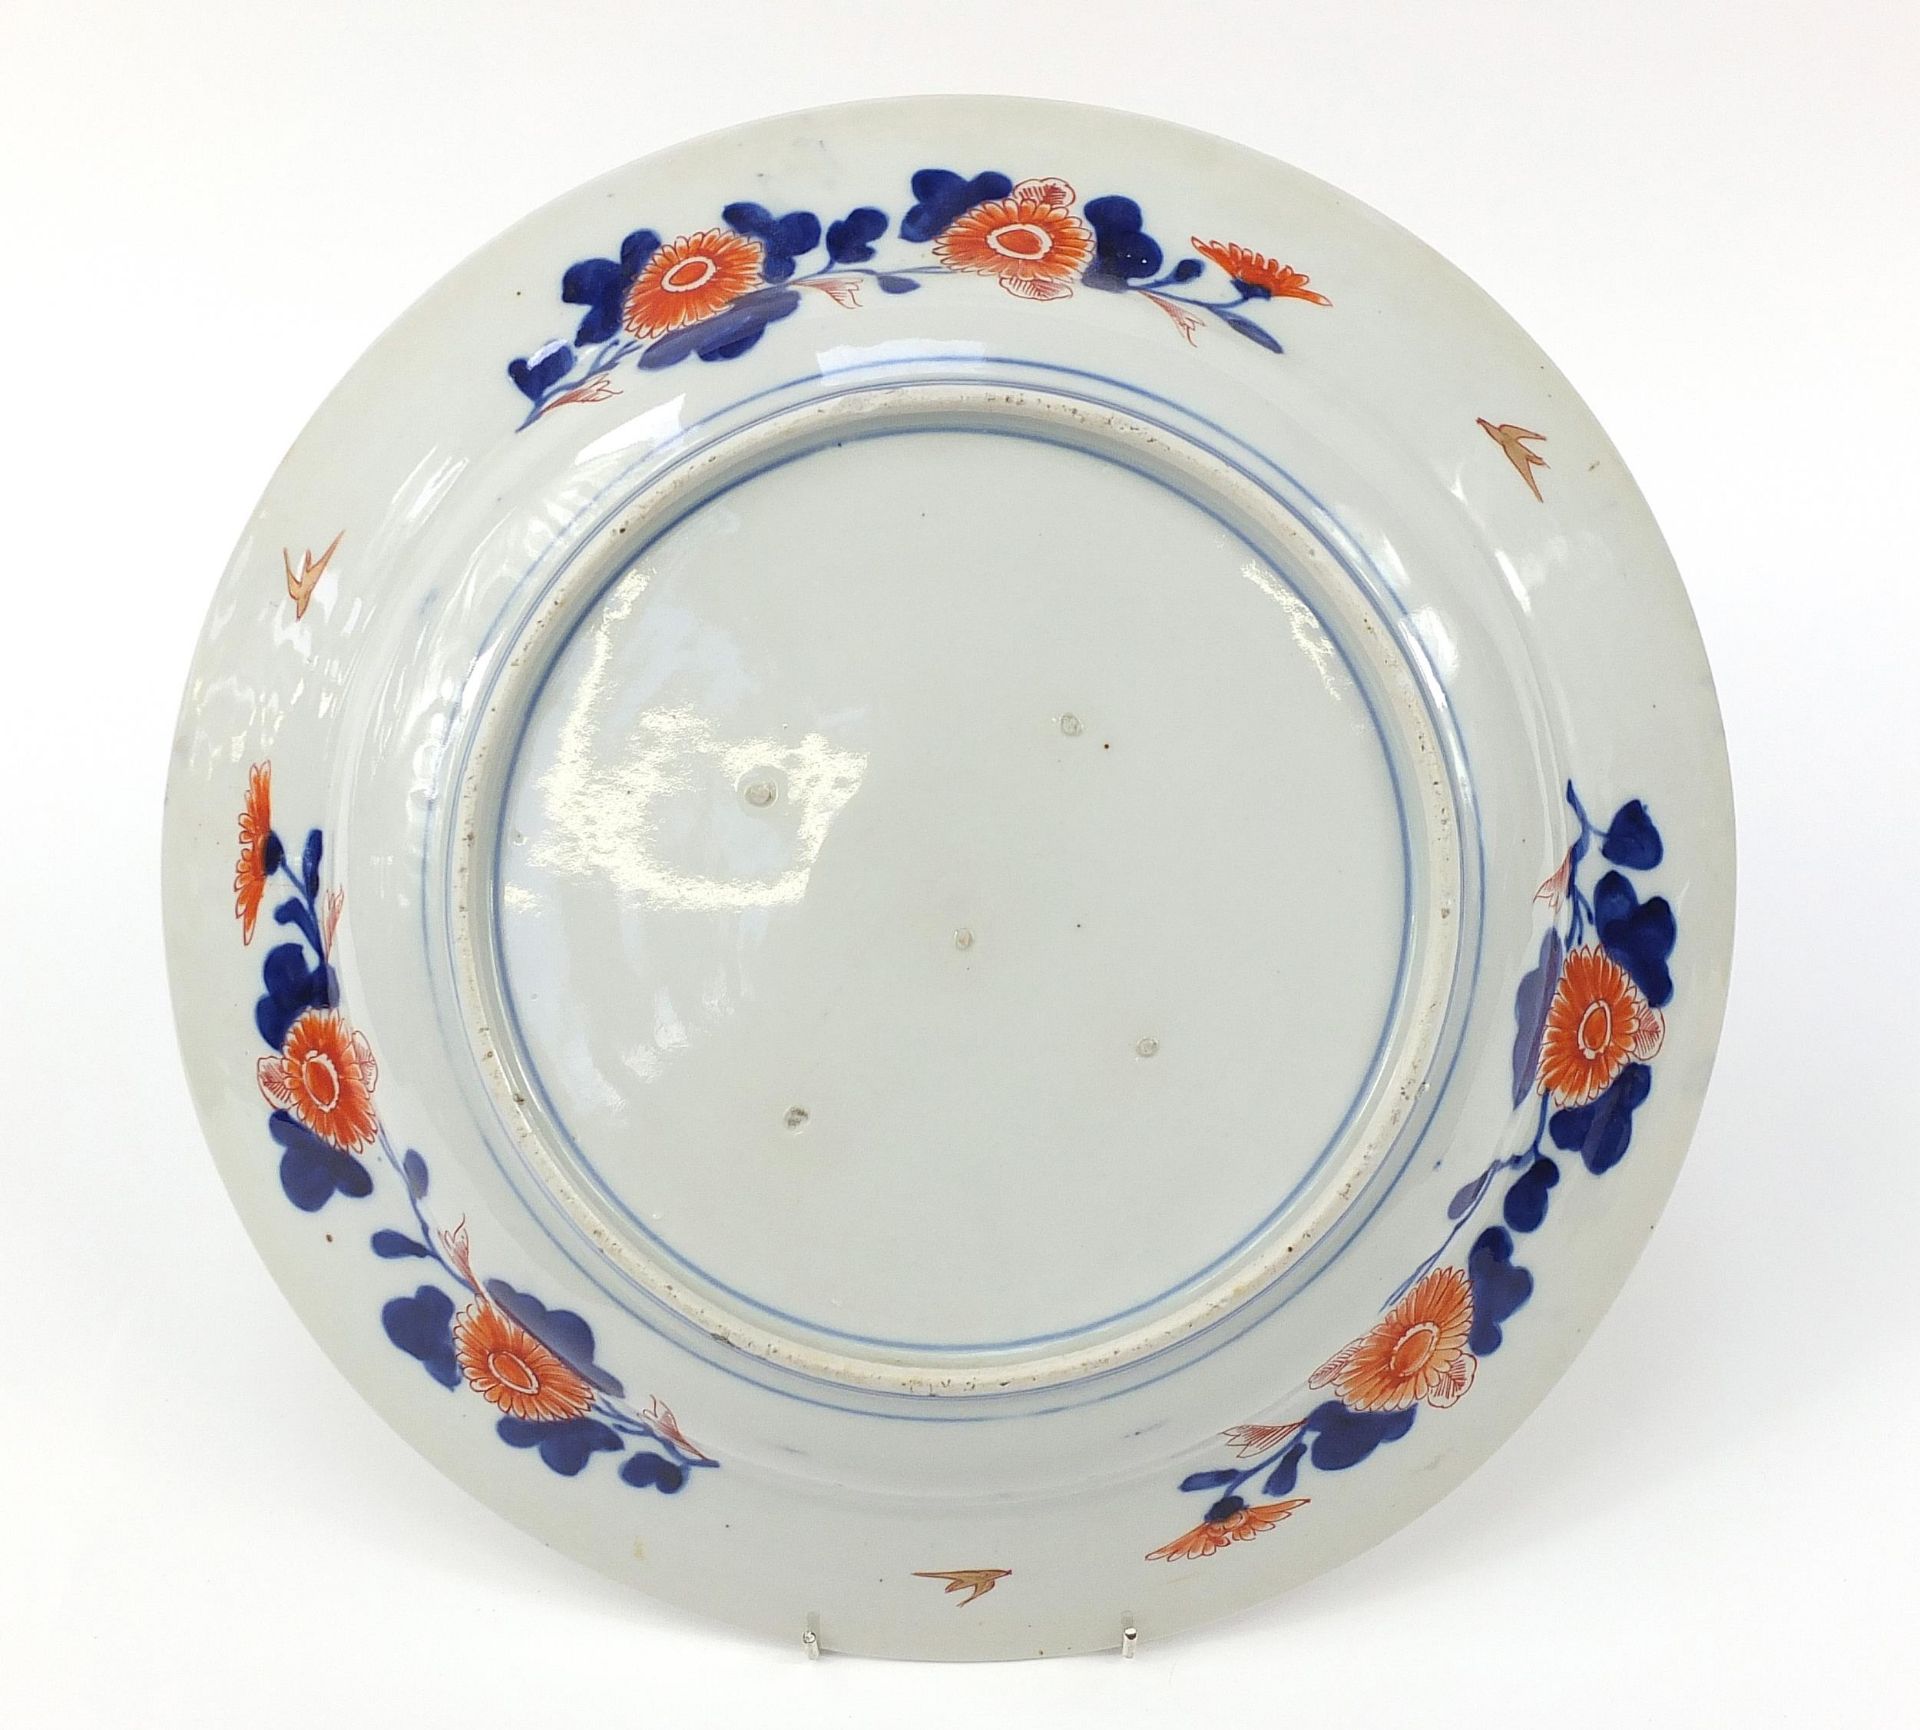 Japanese Imari porcelain charger hand painted with figures, birds and flowers, 41cm in diameter - Image 4 of 4